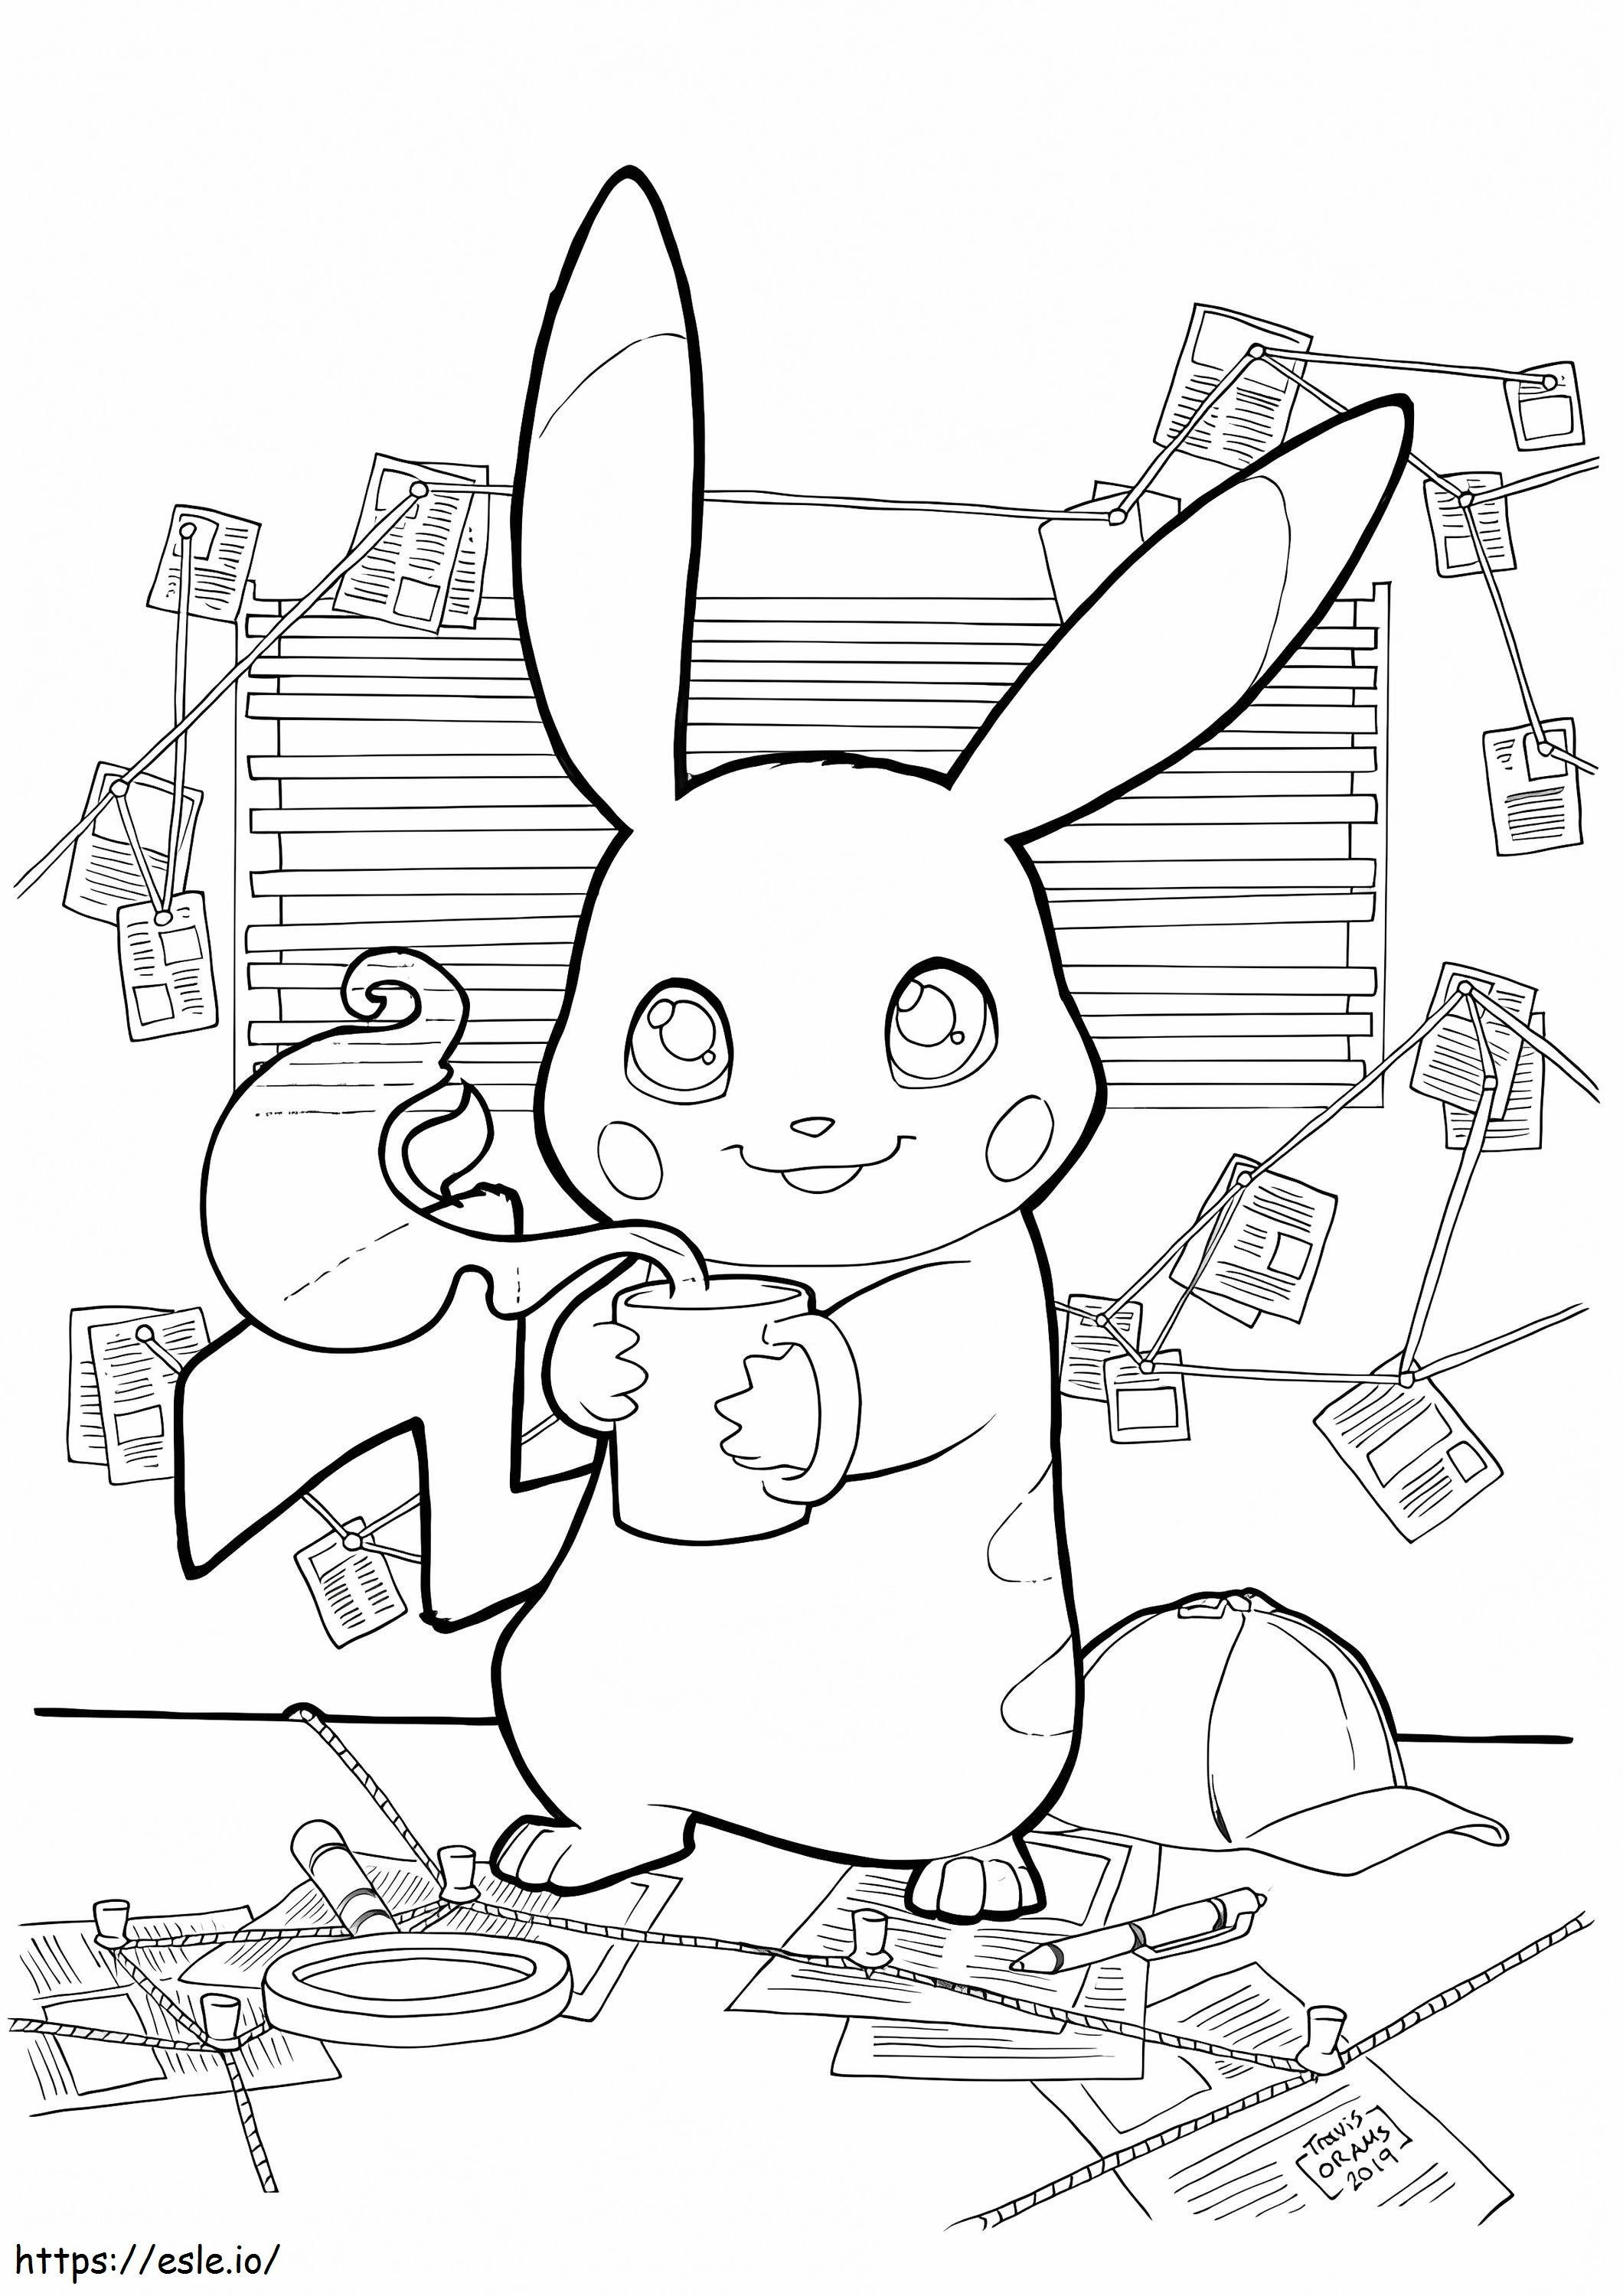 Pikachu With Coffee coloring page